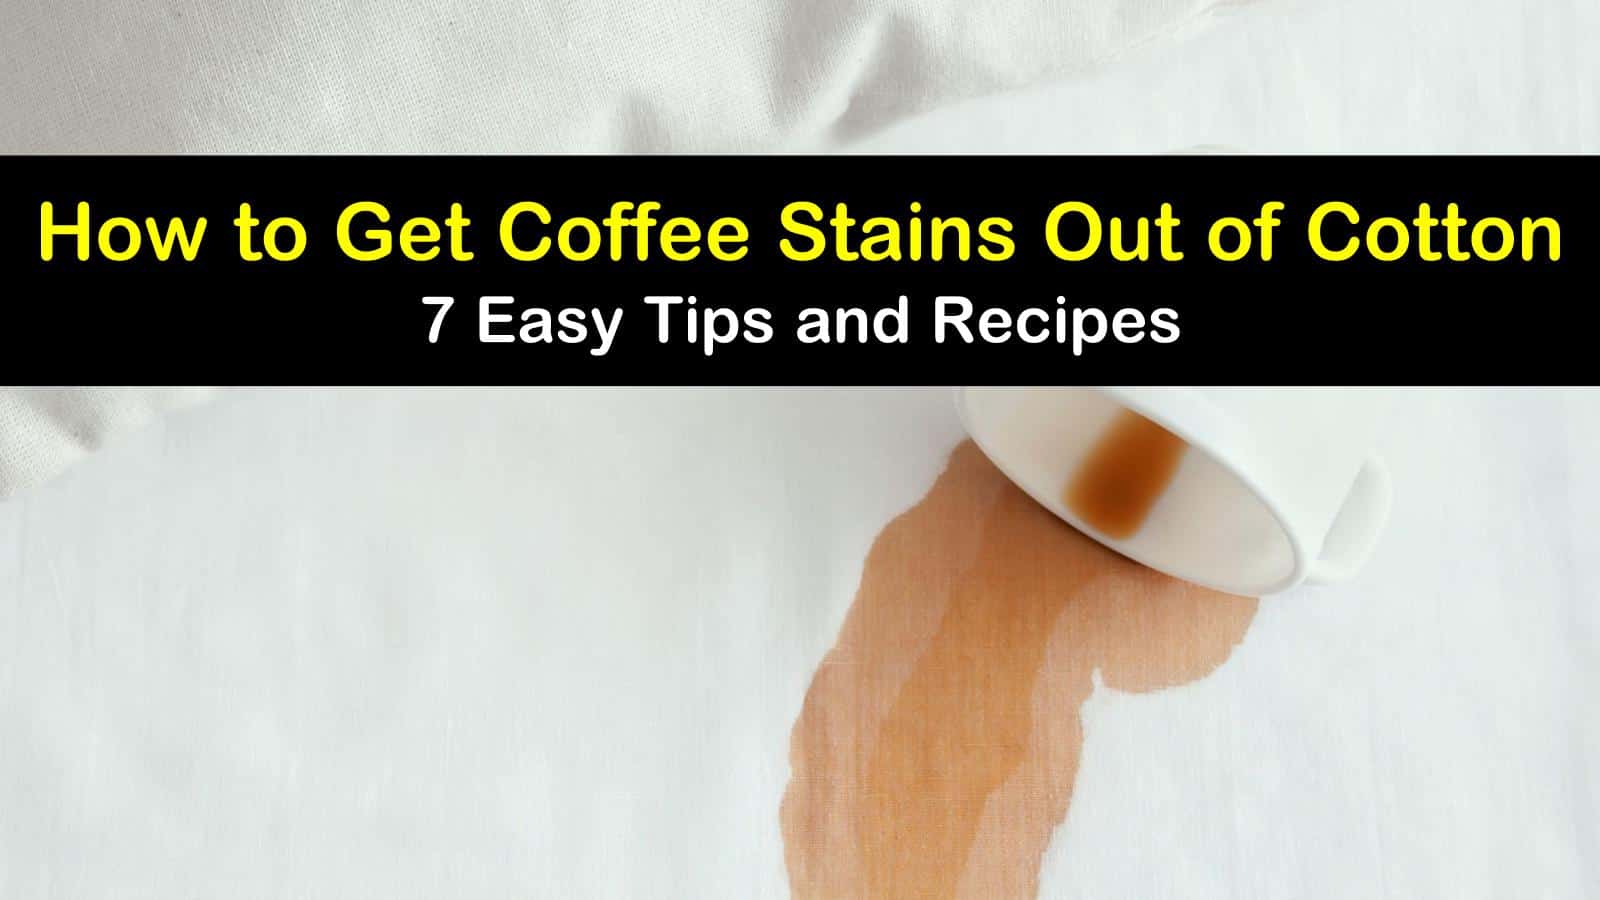 how to get coffee stains out of cotton titleimg1